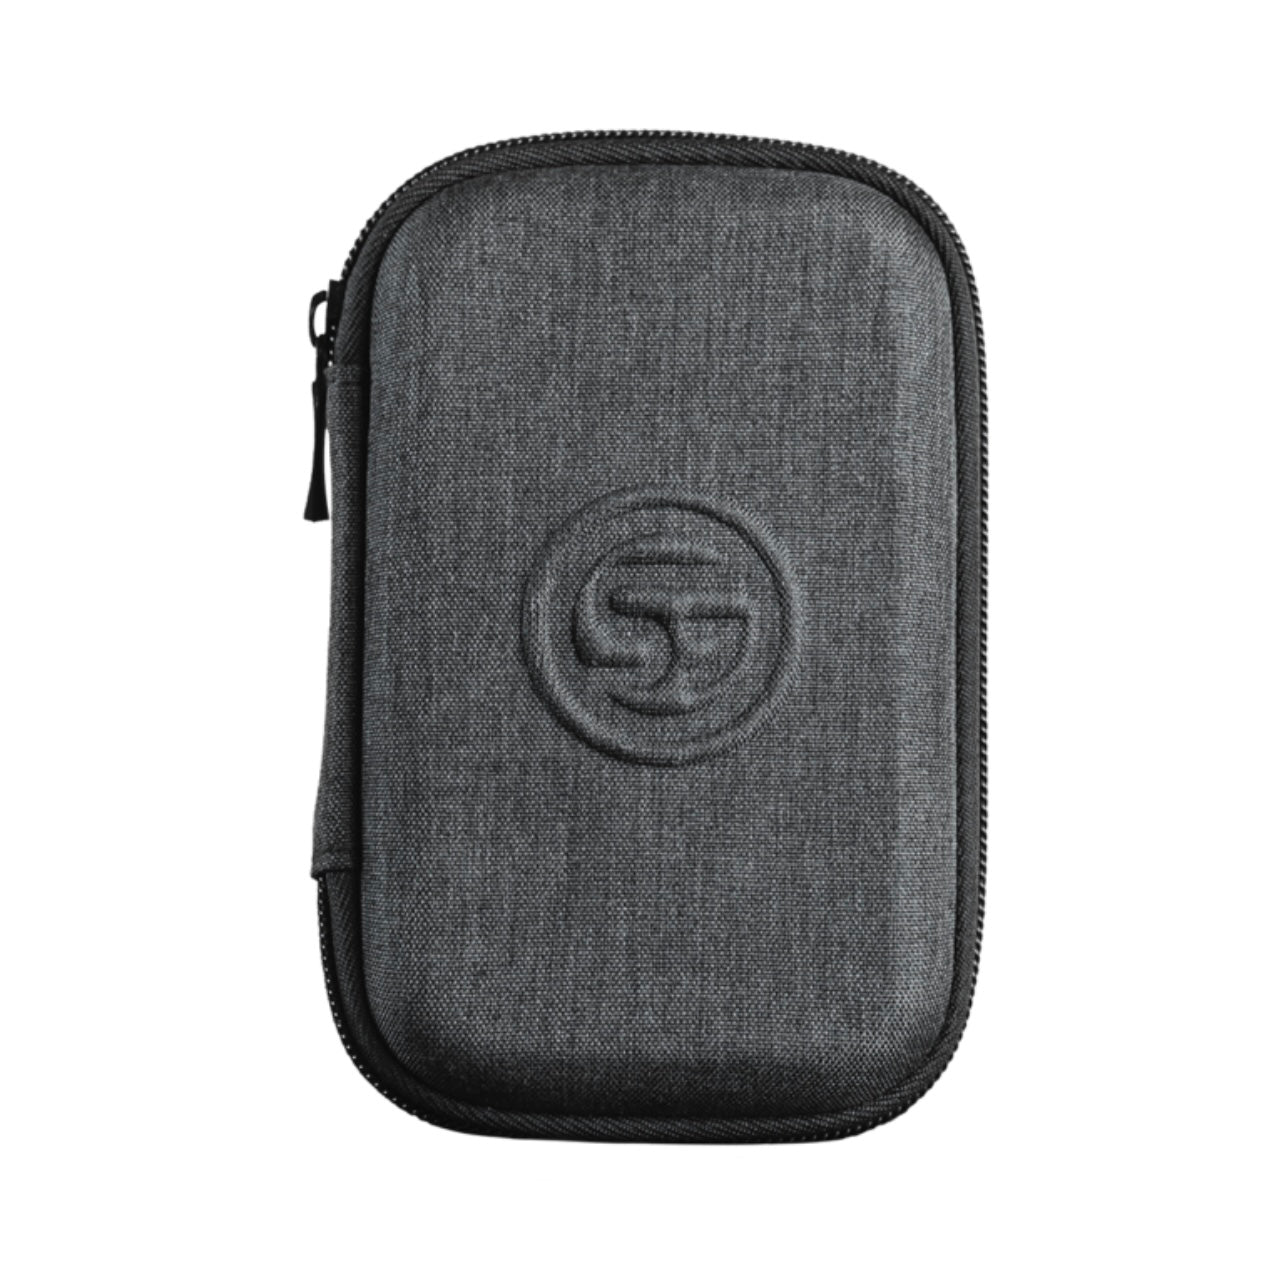 Carrying case for SG Timer